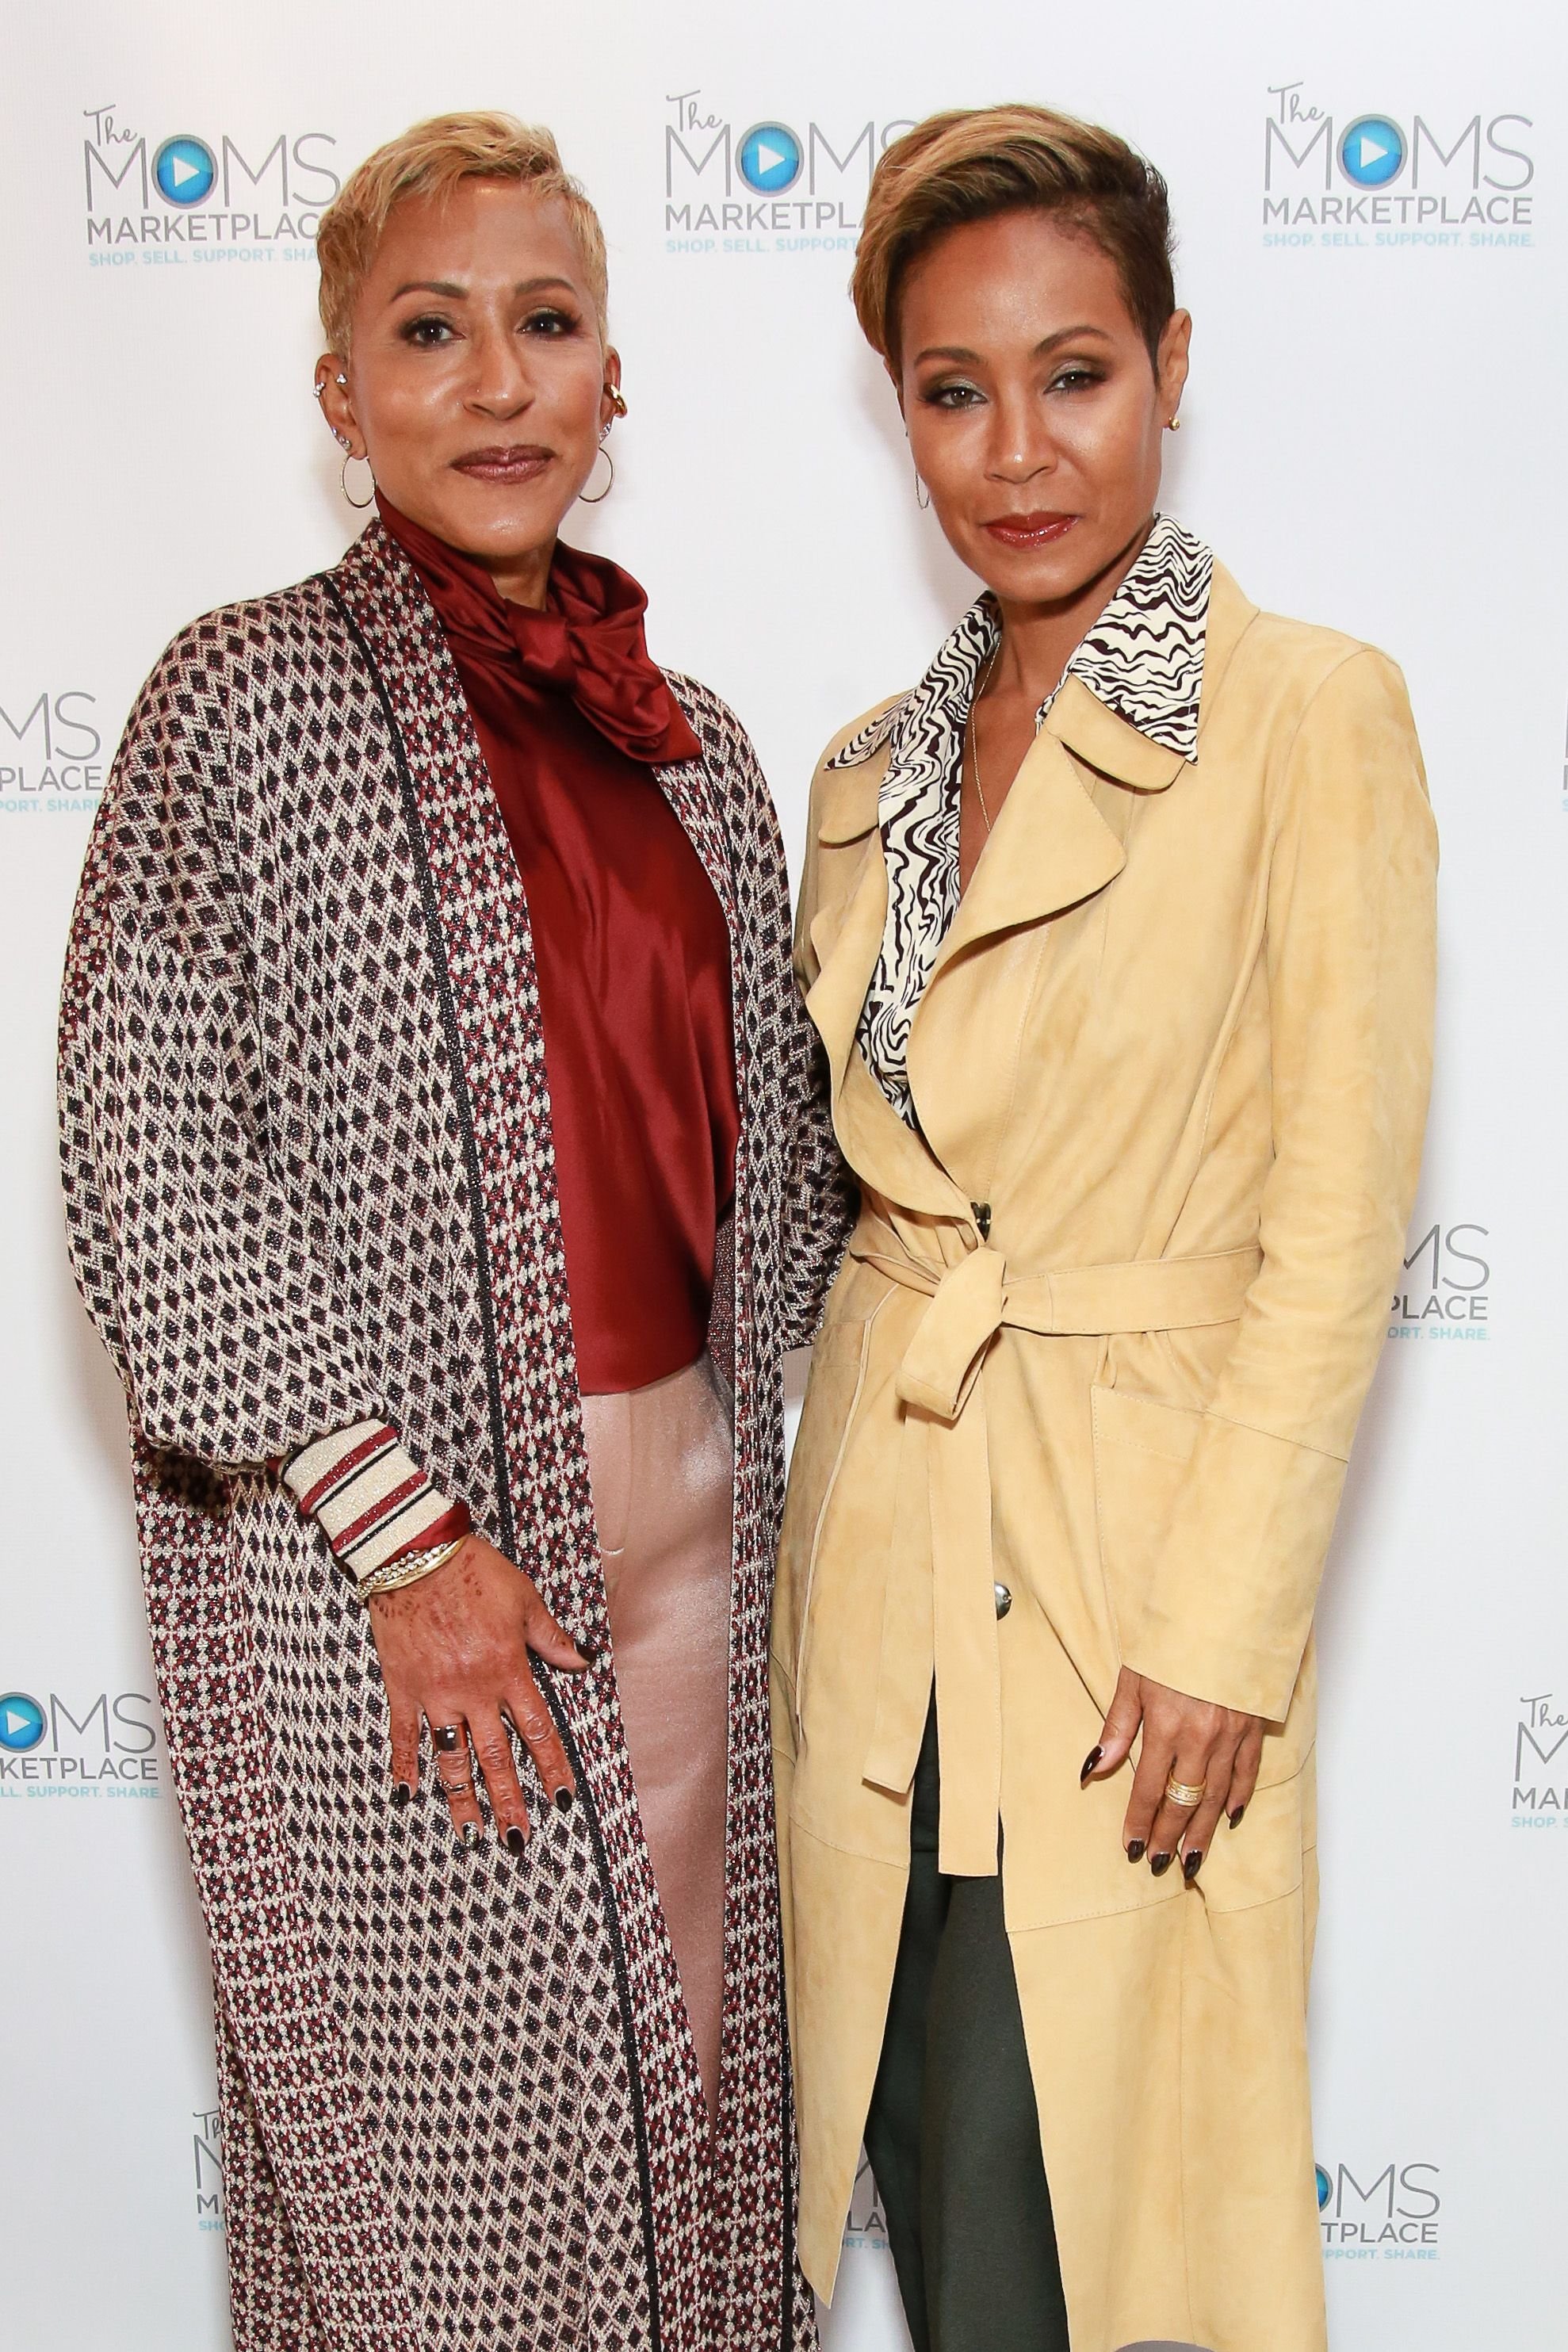 Adrienne Banfield-Norris and Jada Pinkett Smith at "THE MOMS' on October 23, 2018 | Photo: Getty Images